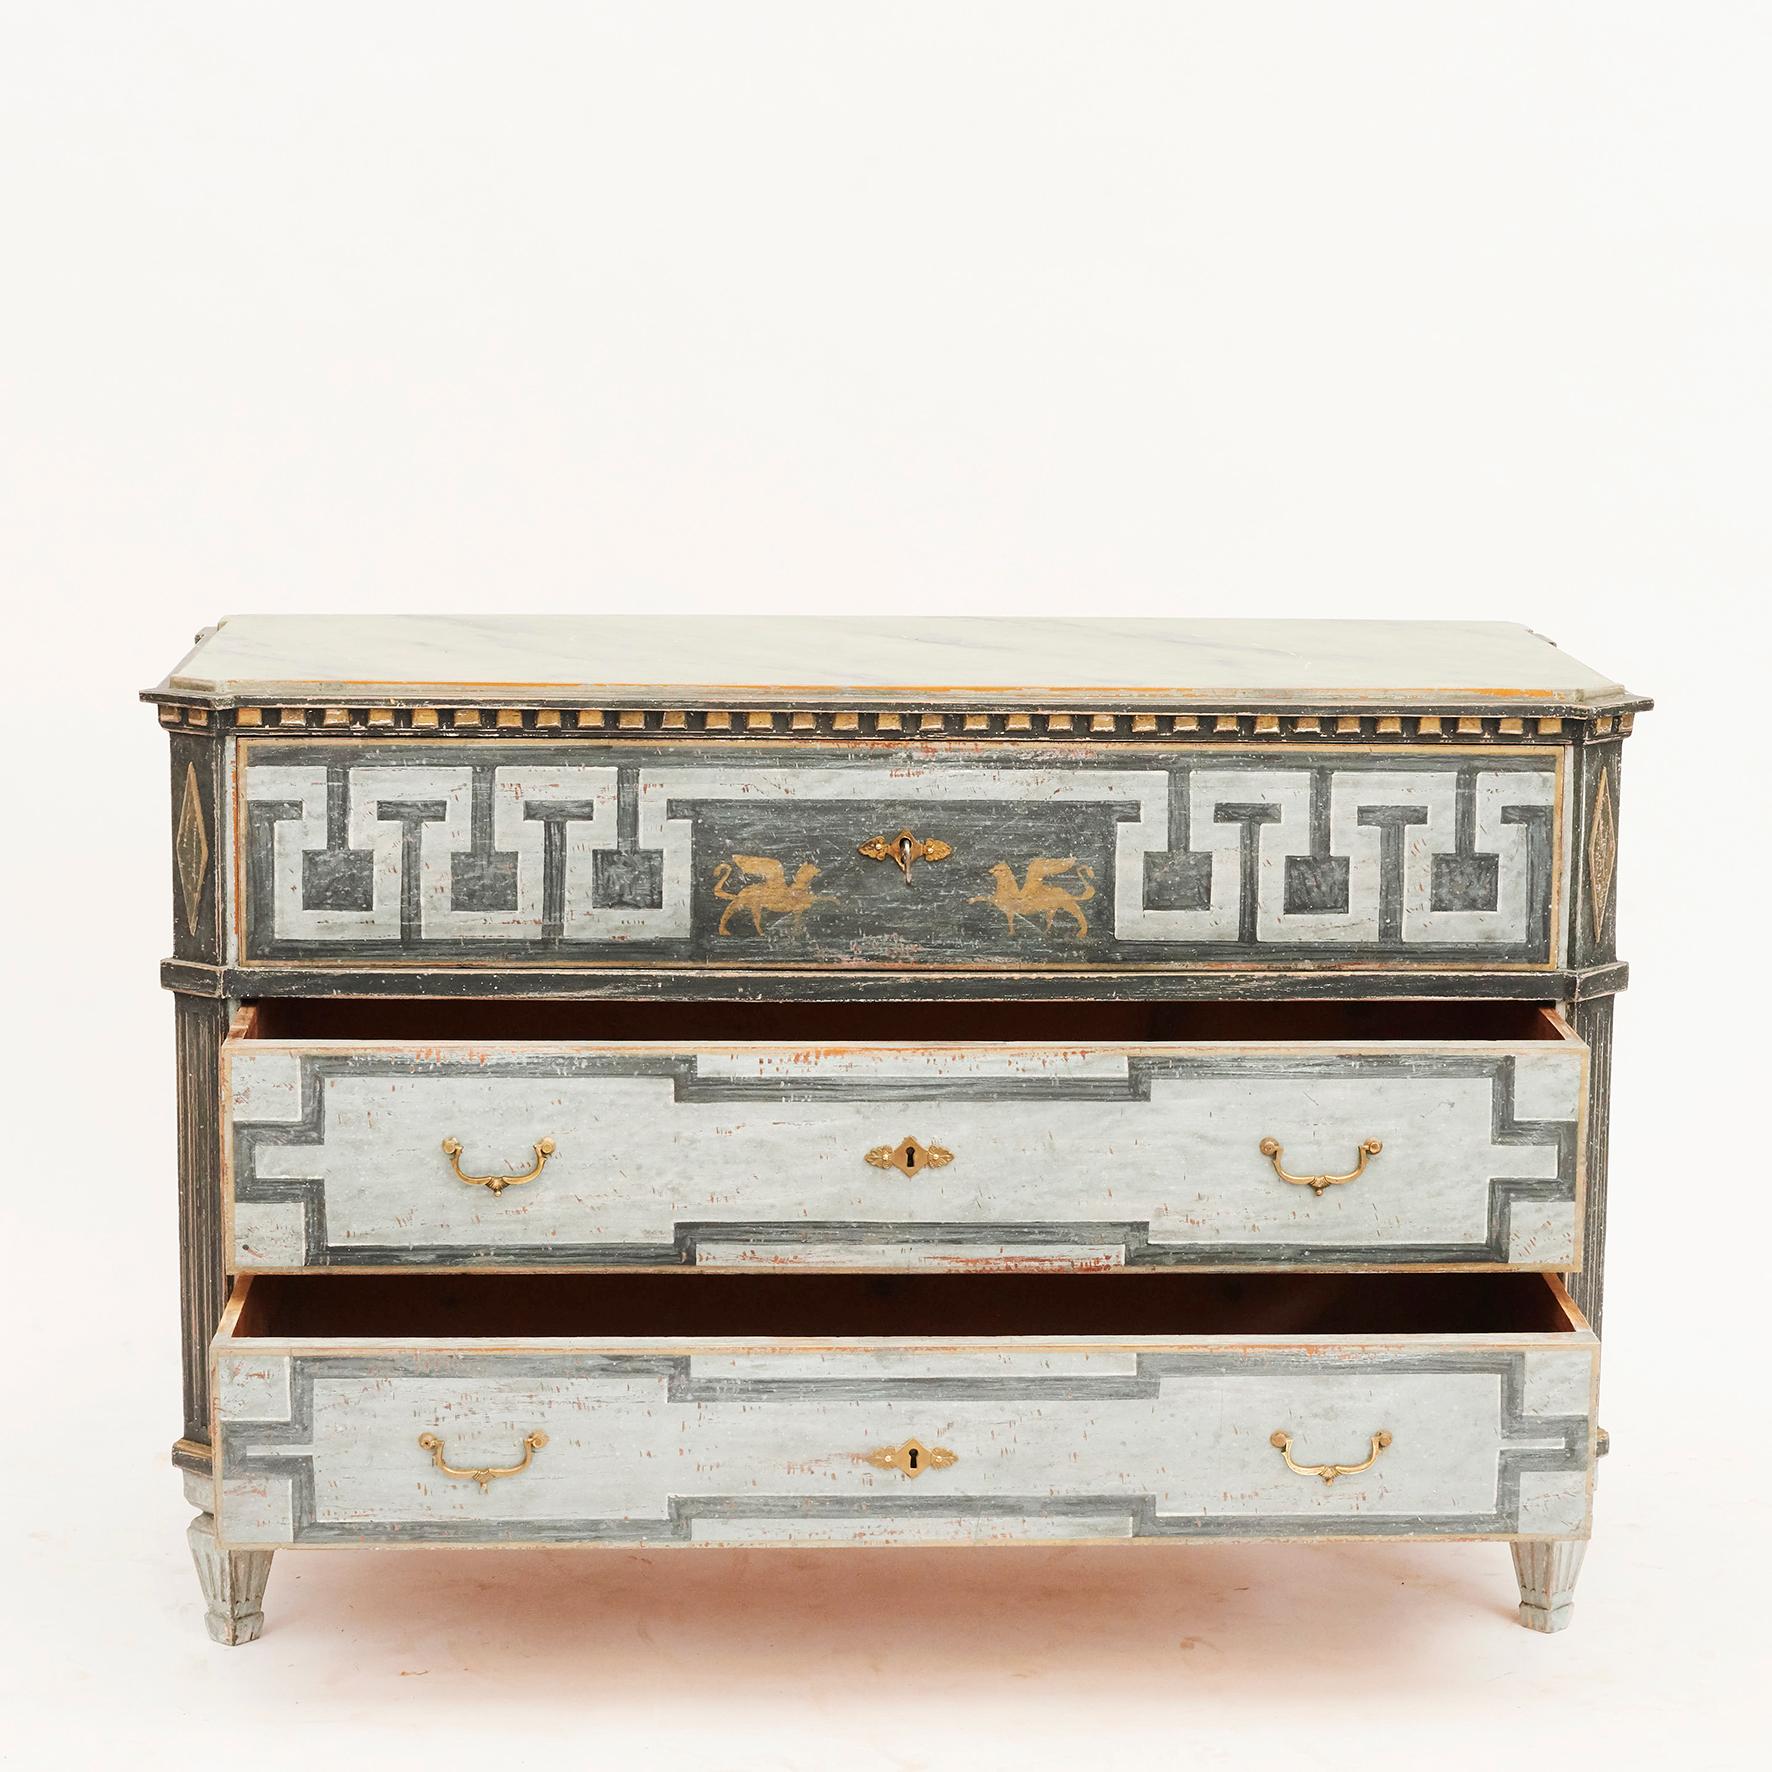 Chest of drawers, Gustavian style. Painted in blue shades. Tabletop blue-gray marbled. 3 drawers. Upper drawer with 'à la grecque' motif.
Sweden, 1840-1860. Very decorative.